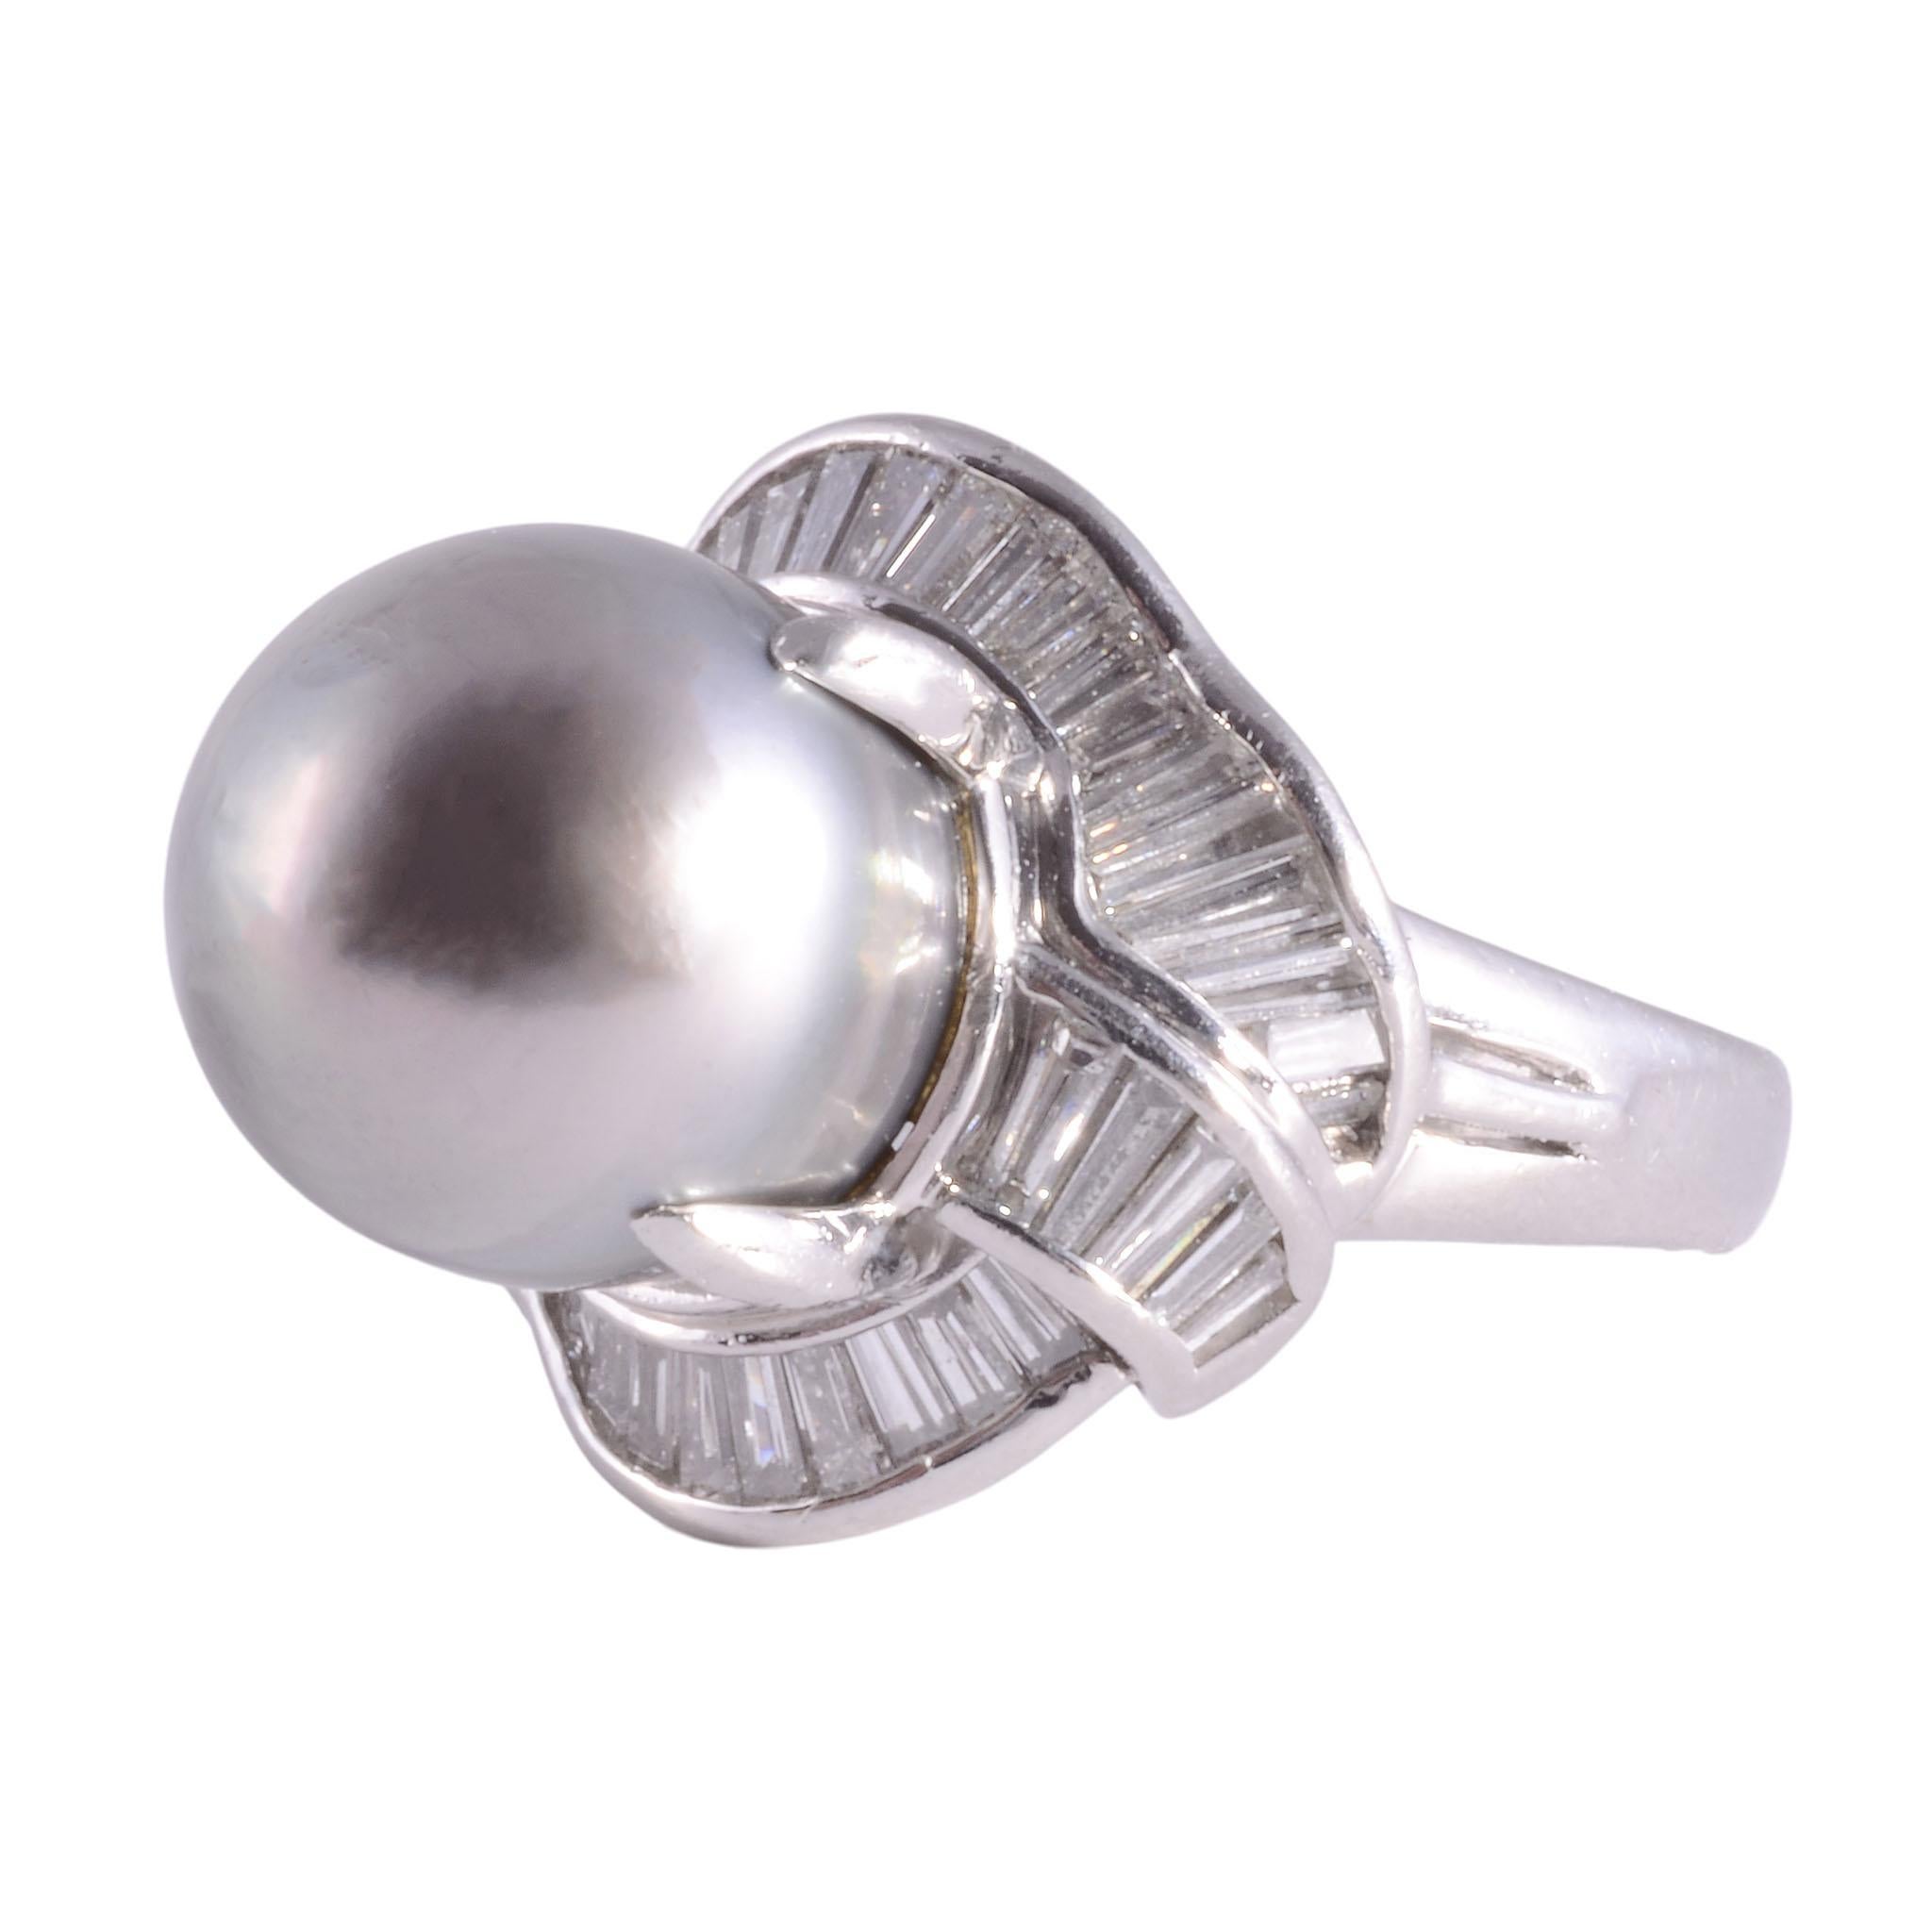 Estate South Seas pearl platinum ring. This platinum ring features a 15-15.5mm South Seas pearl center that is a fine medium gray with a pinkish overtone. It is accented with 1.16 carat total weight of fine cut baguette diamonds having VS-SI clarity